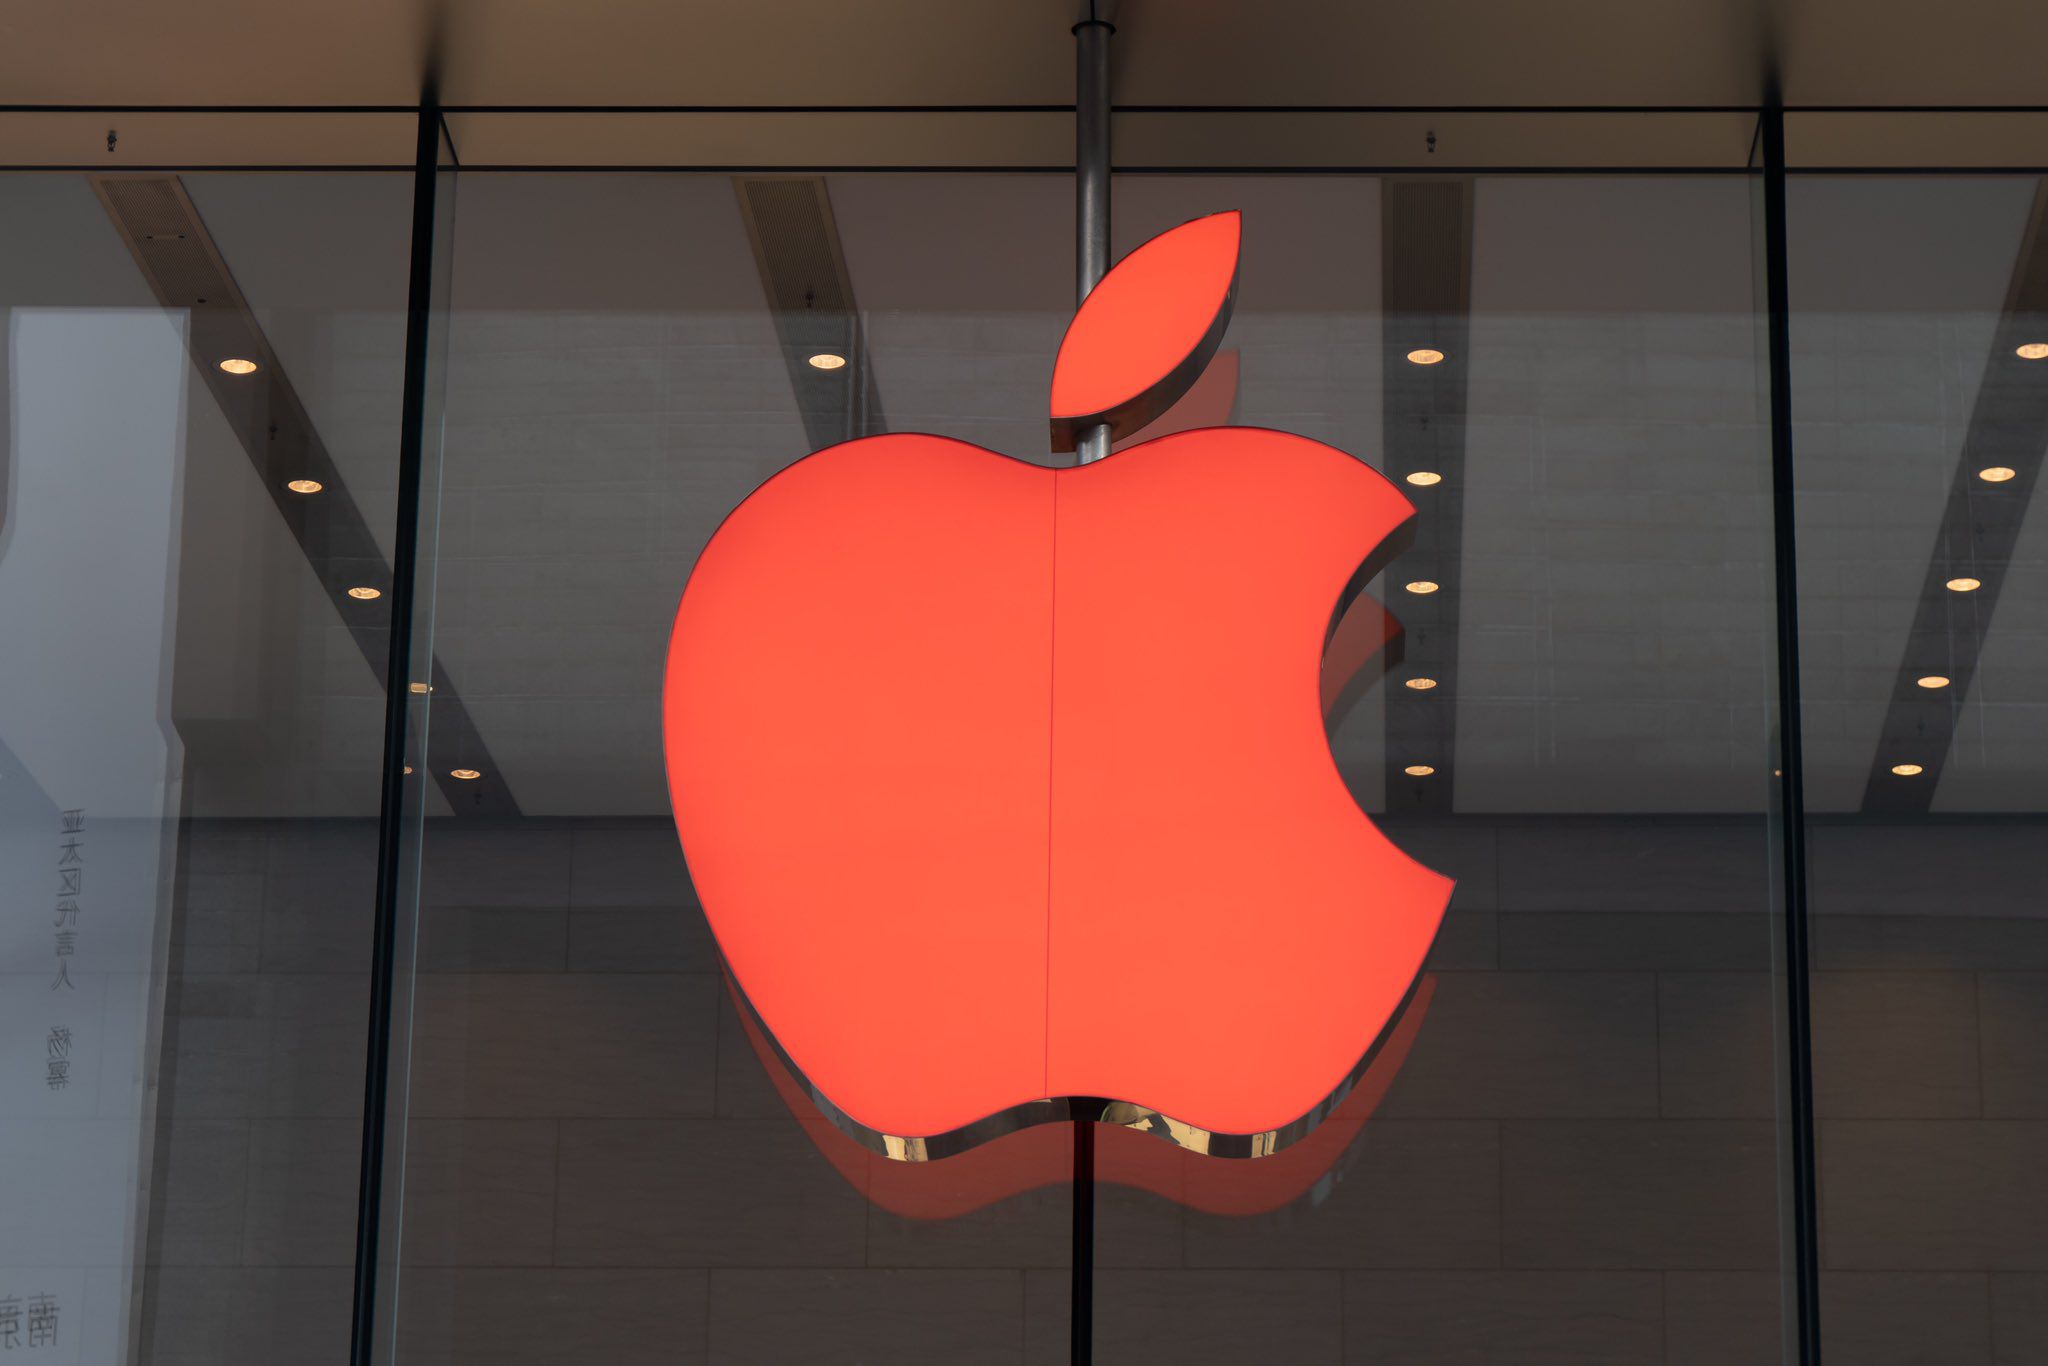 Apple World AIDS Day With Red Logo at and Apple Pay Promotion - MacRumors